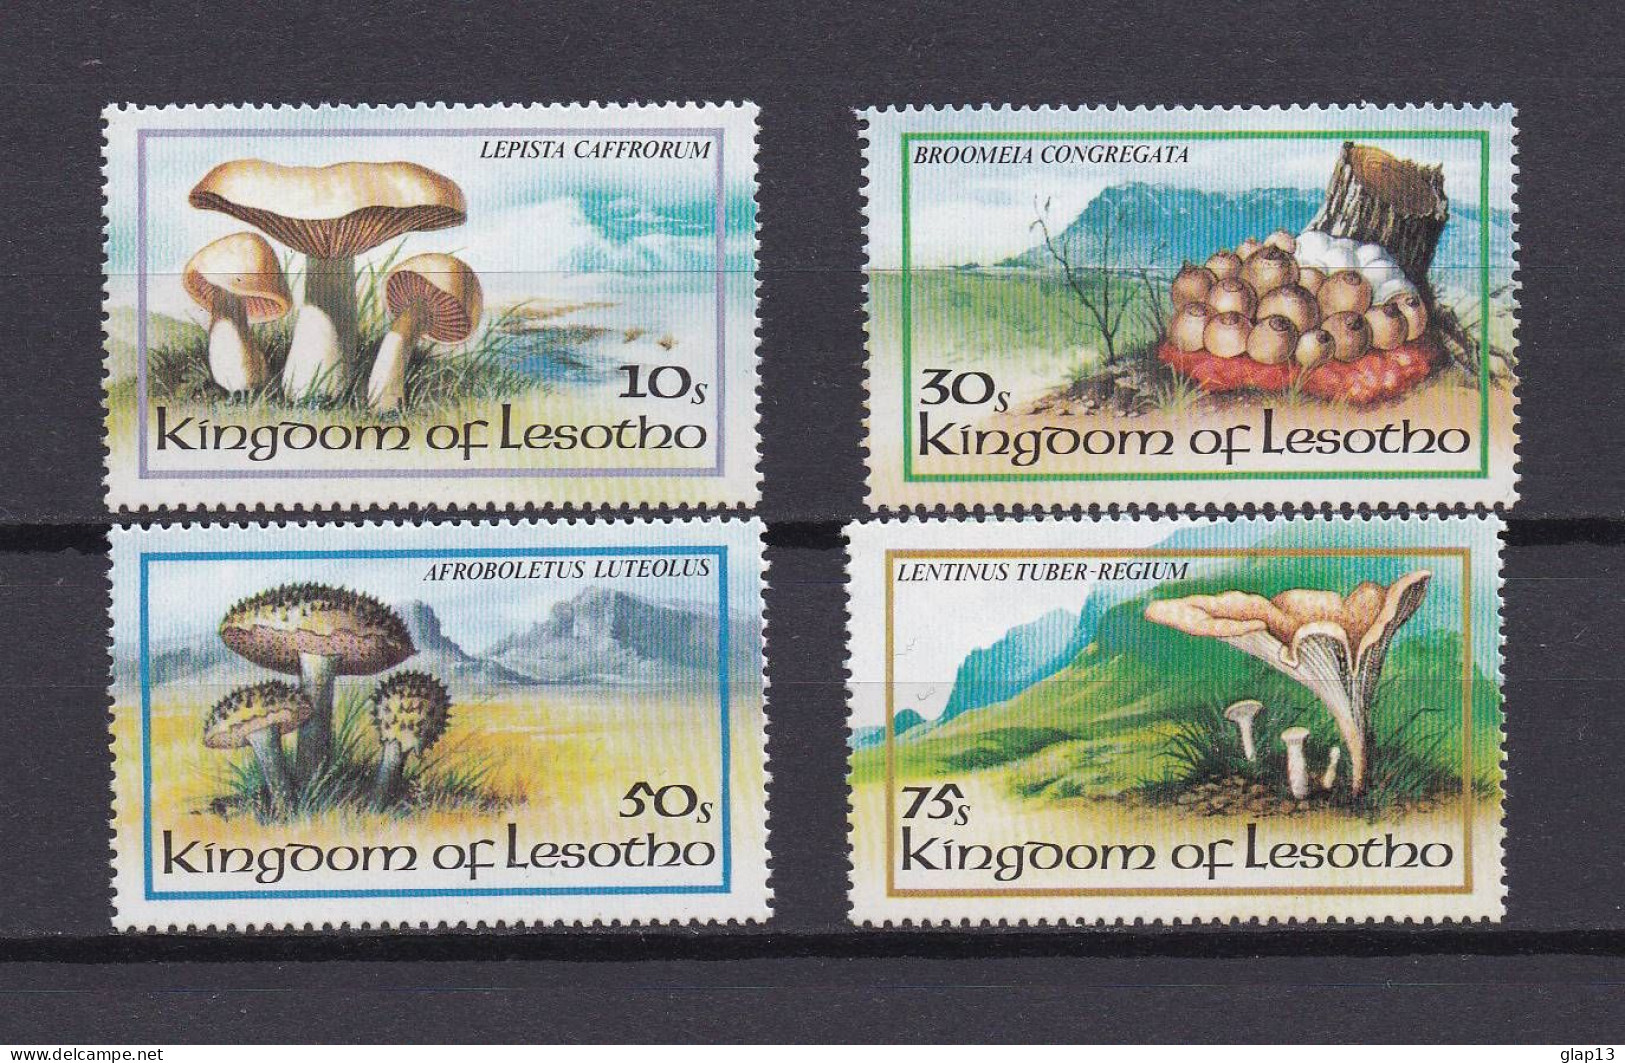 LESOTHO 1983 TIMBRE N°533/36 NEUF** CHAMPIGNONS - Lesotho (1966-...)